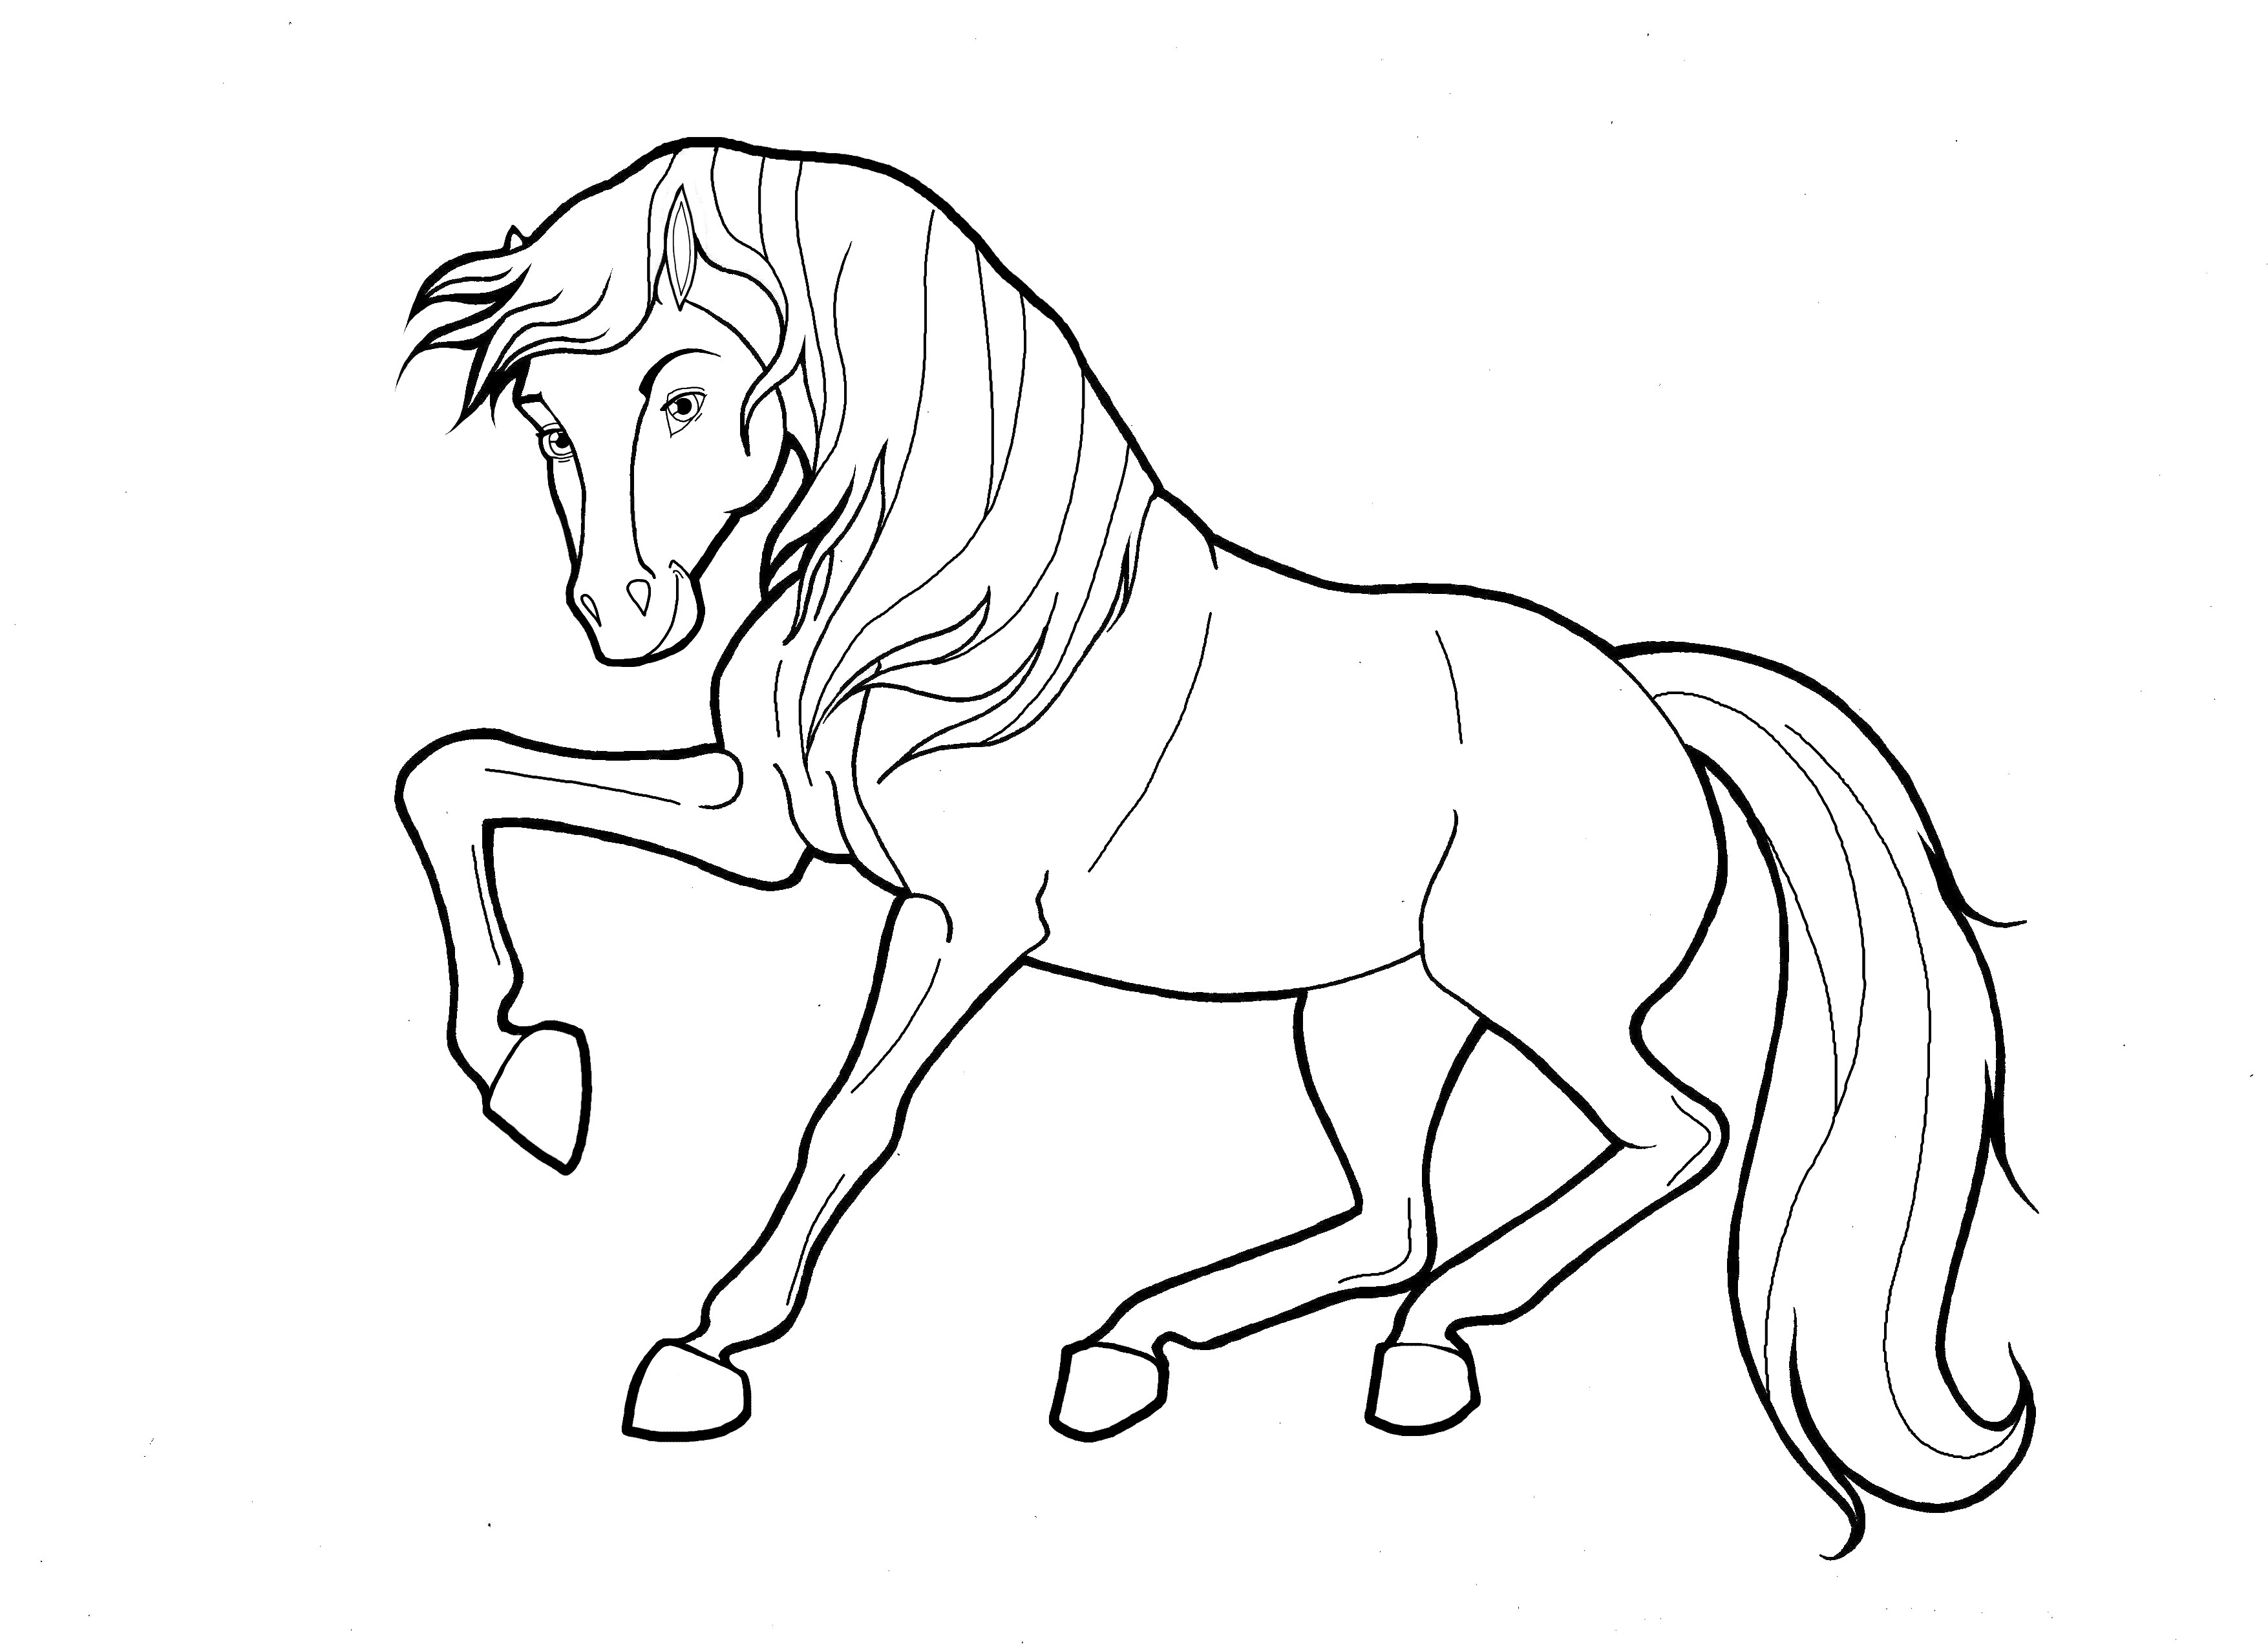 Spirit Riding Free Coloring Pages at GetColorings.com  Free printable